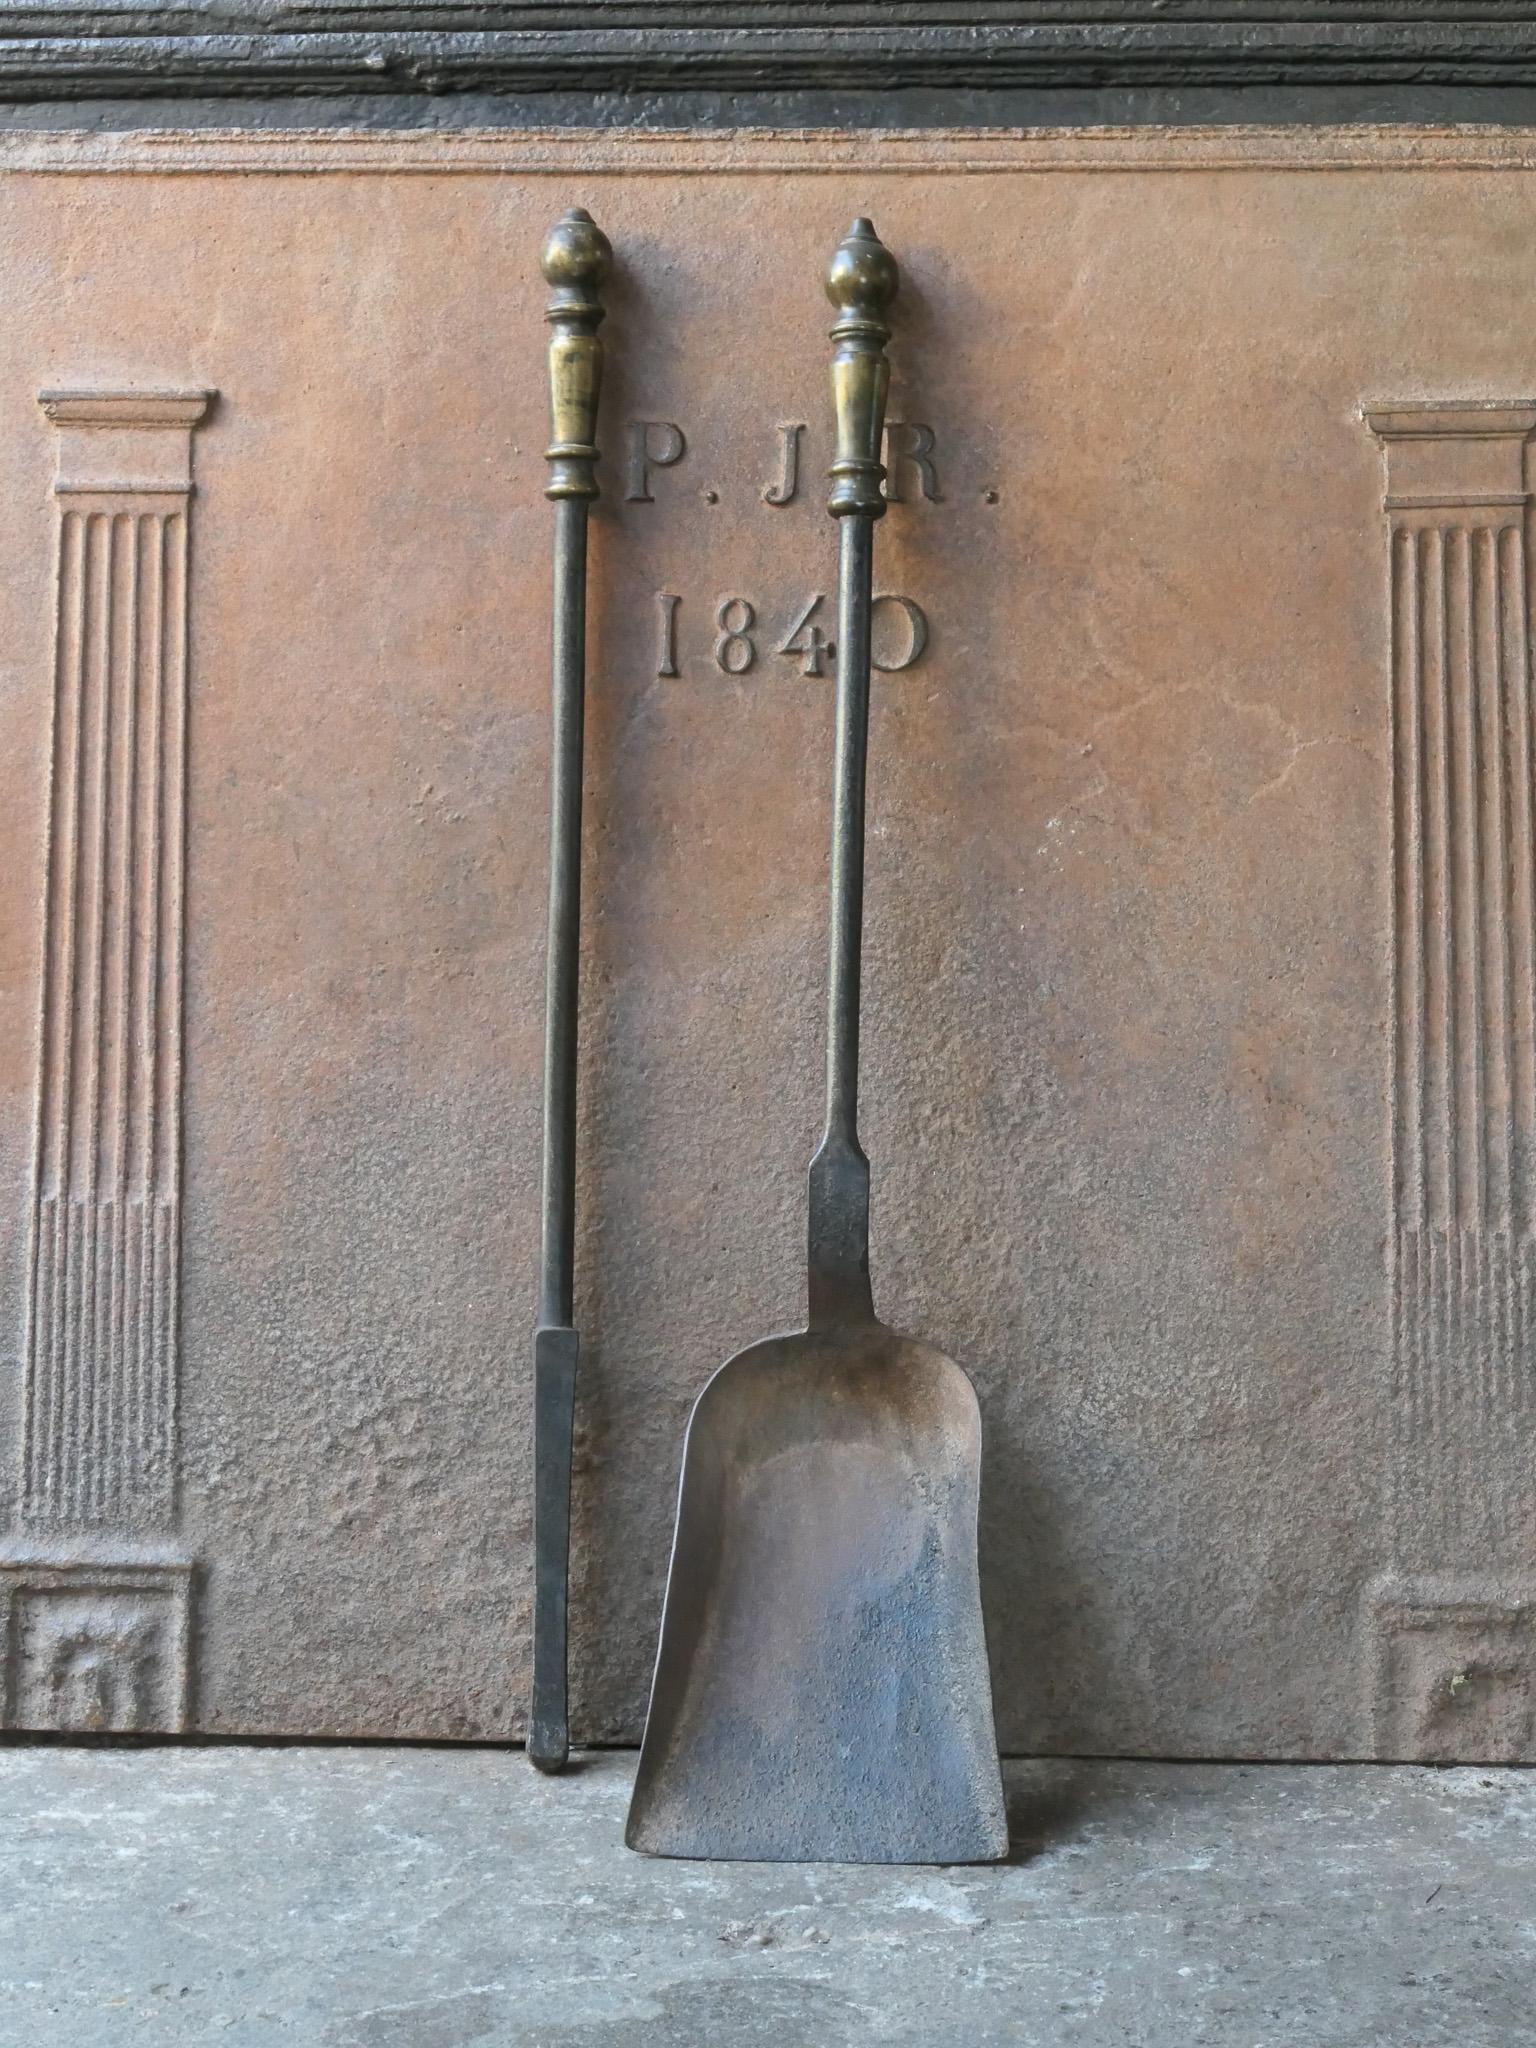 Large 19th-20th century French fireplace tool set. The tool set consists of a shovel, and fire poker. The tools are made of wrought iron and brass. The set is in a good condition and fit for use in the fireplace.